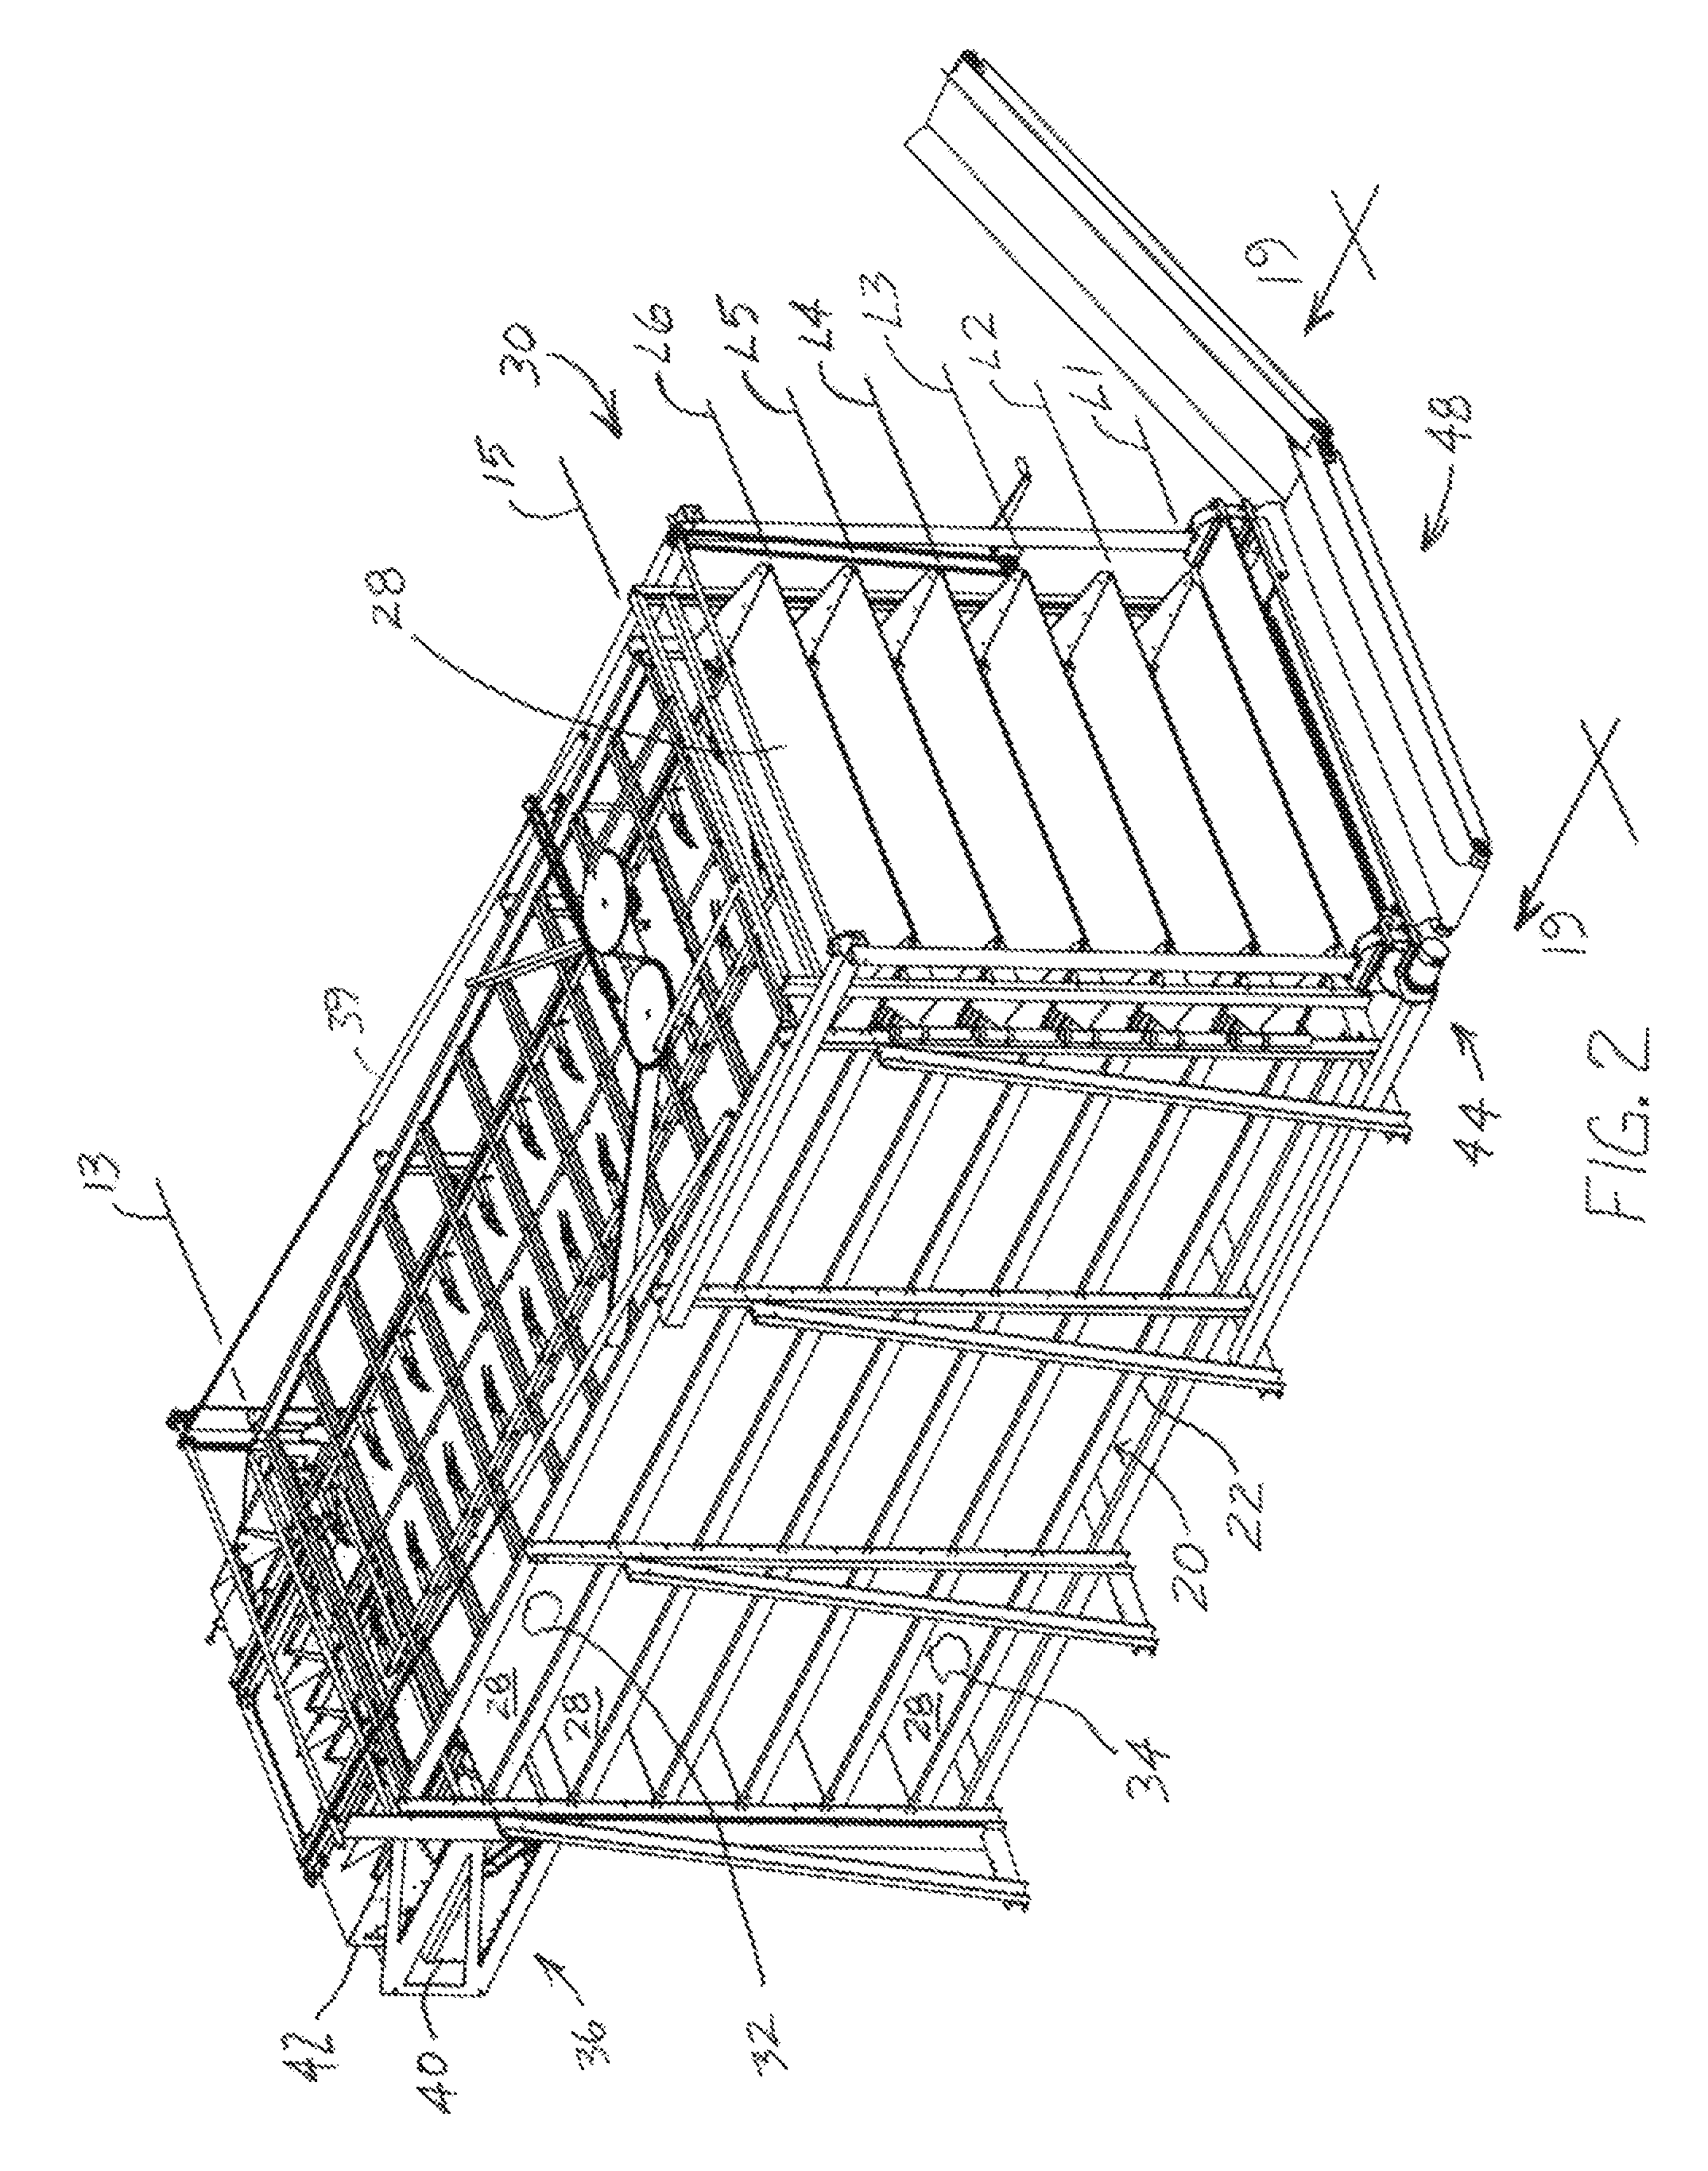 Sprouted seed grain growing and harvesting apparatus and method